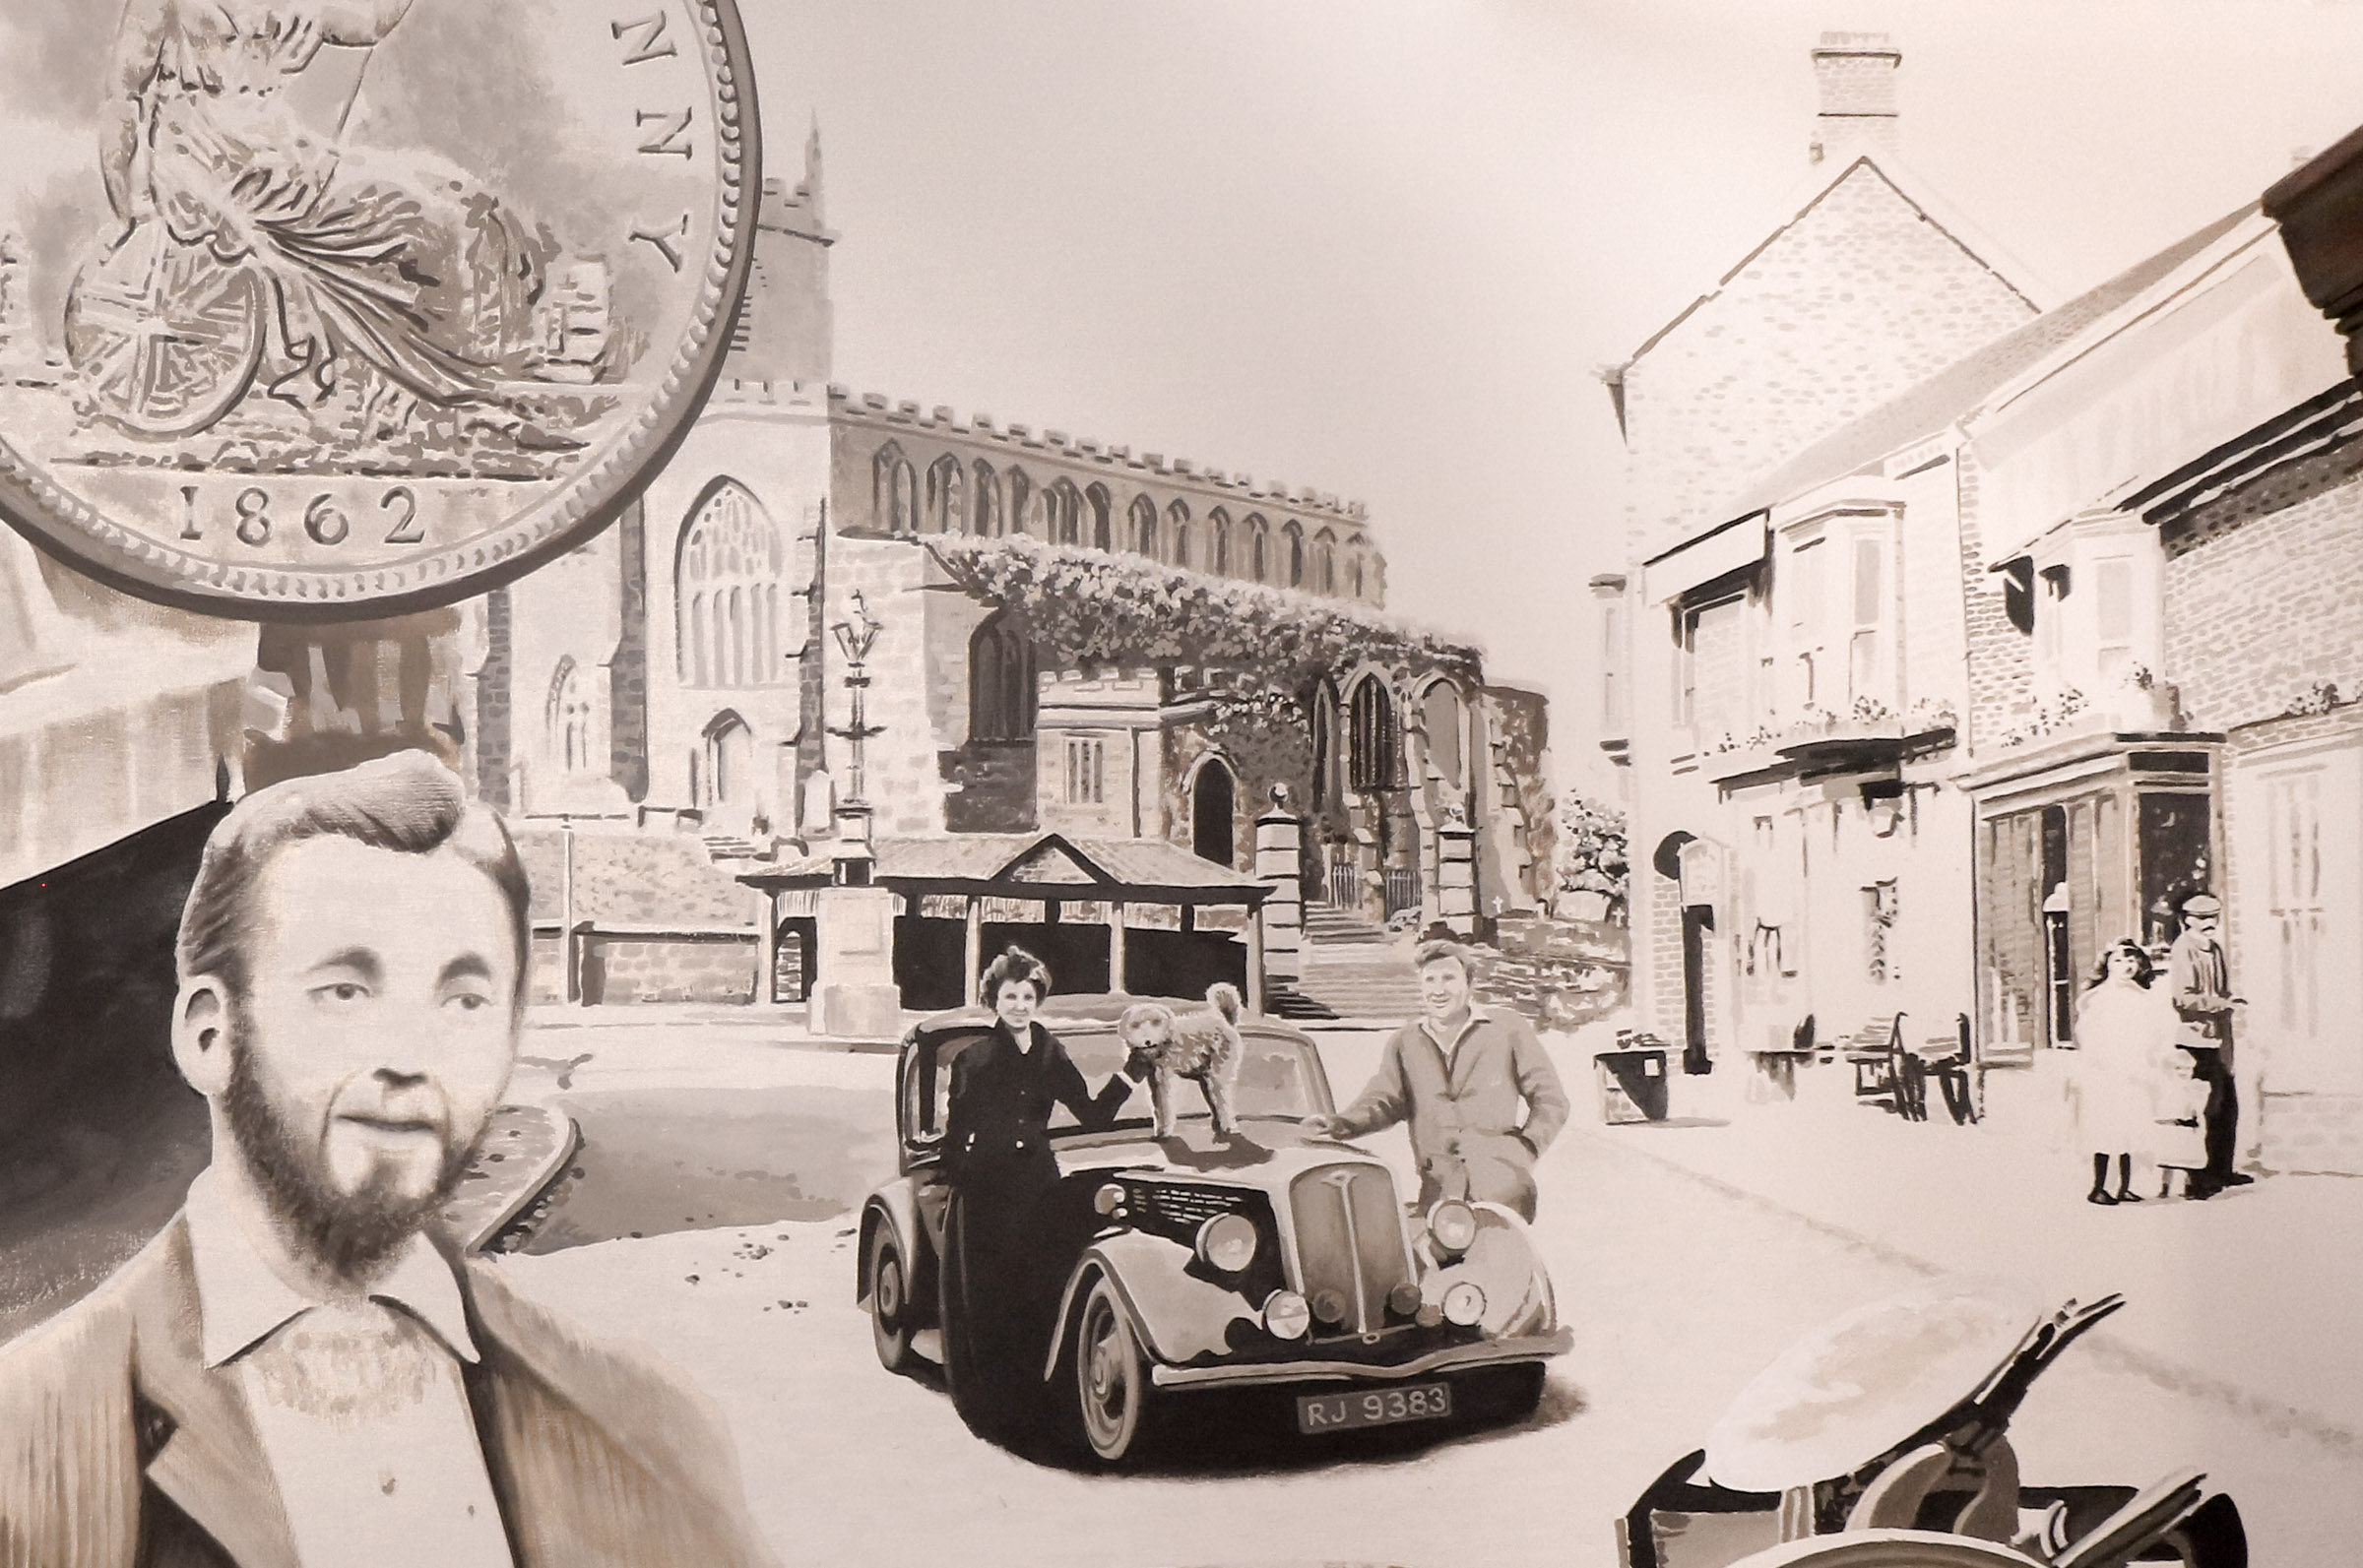 Williams of Audlem Mural - The people beside the 50s car are the current owner's mother and father. The church, the shops and the Victorian folk on the right were taken from a very old photograph of the town